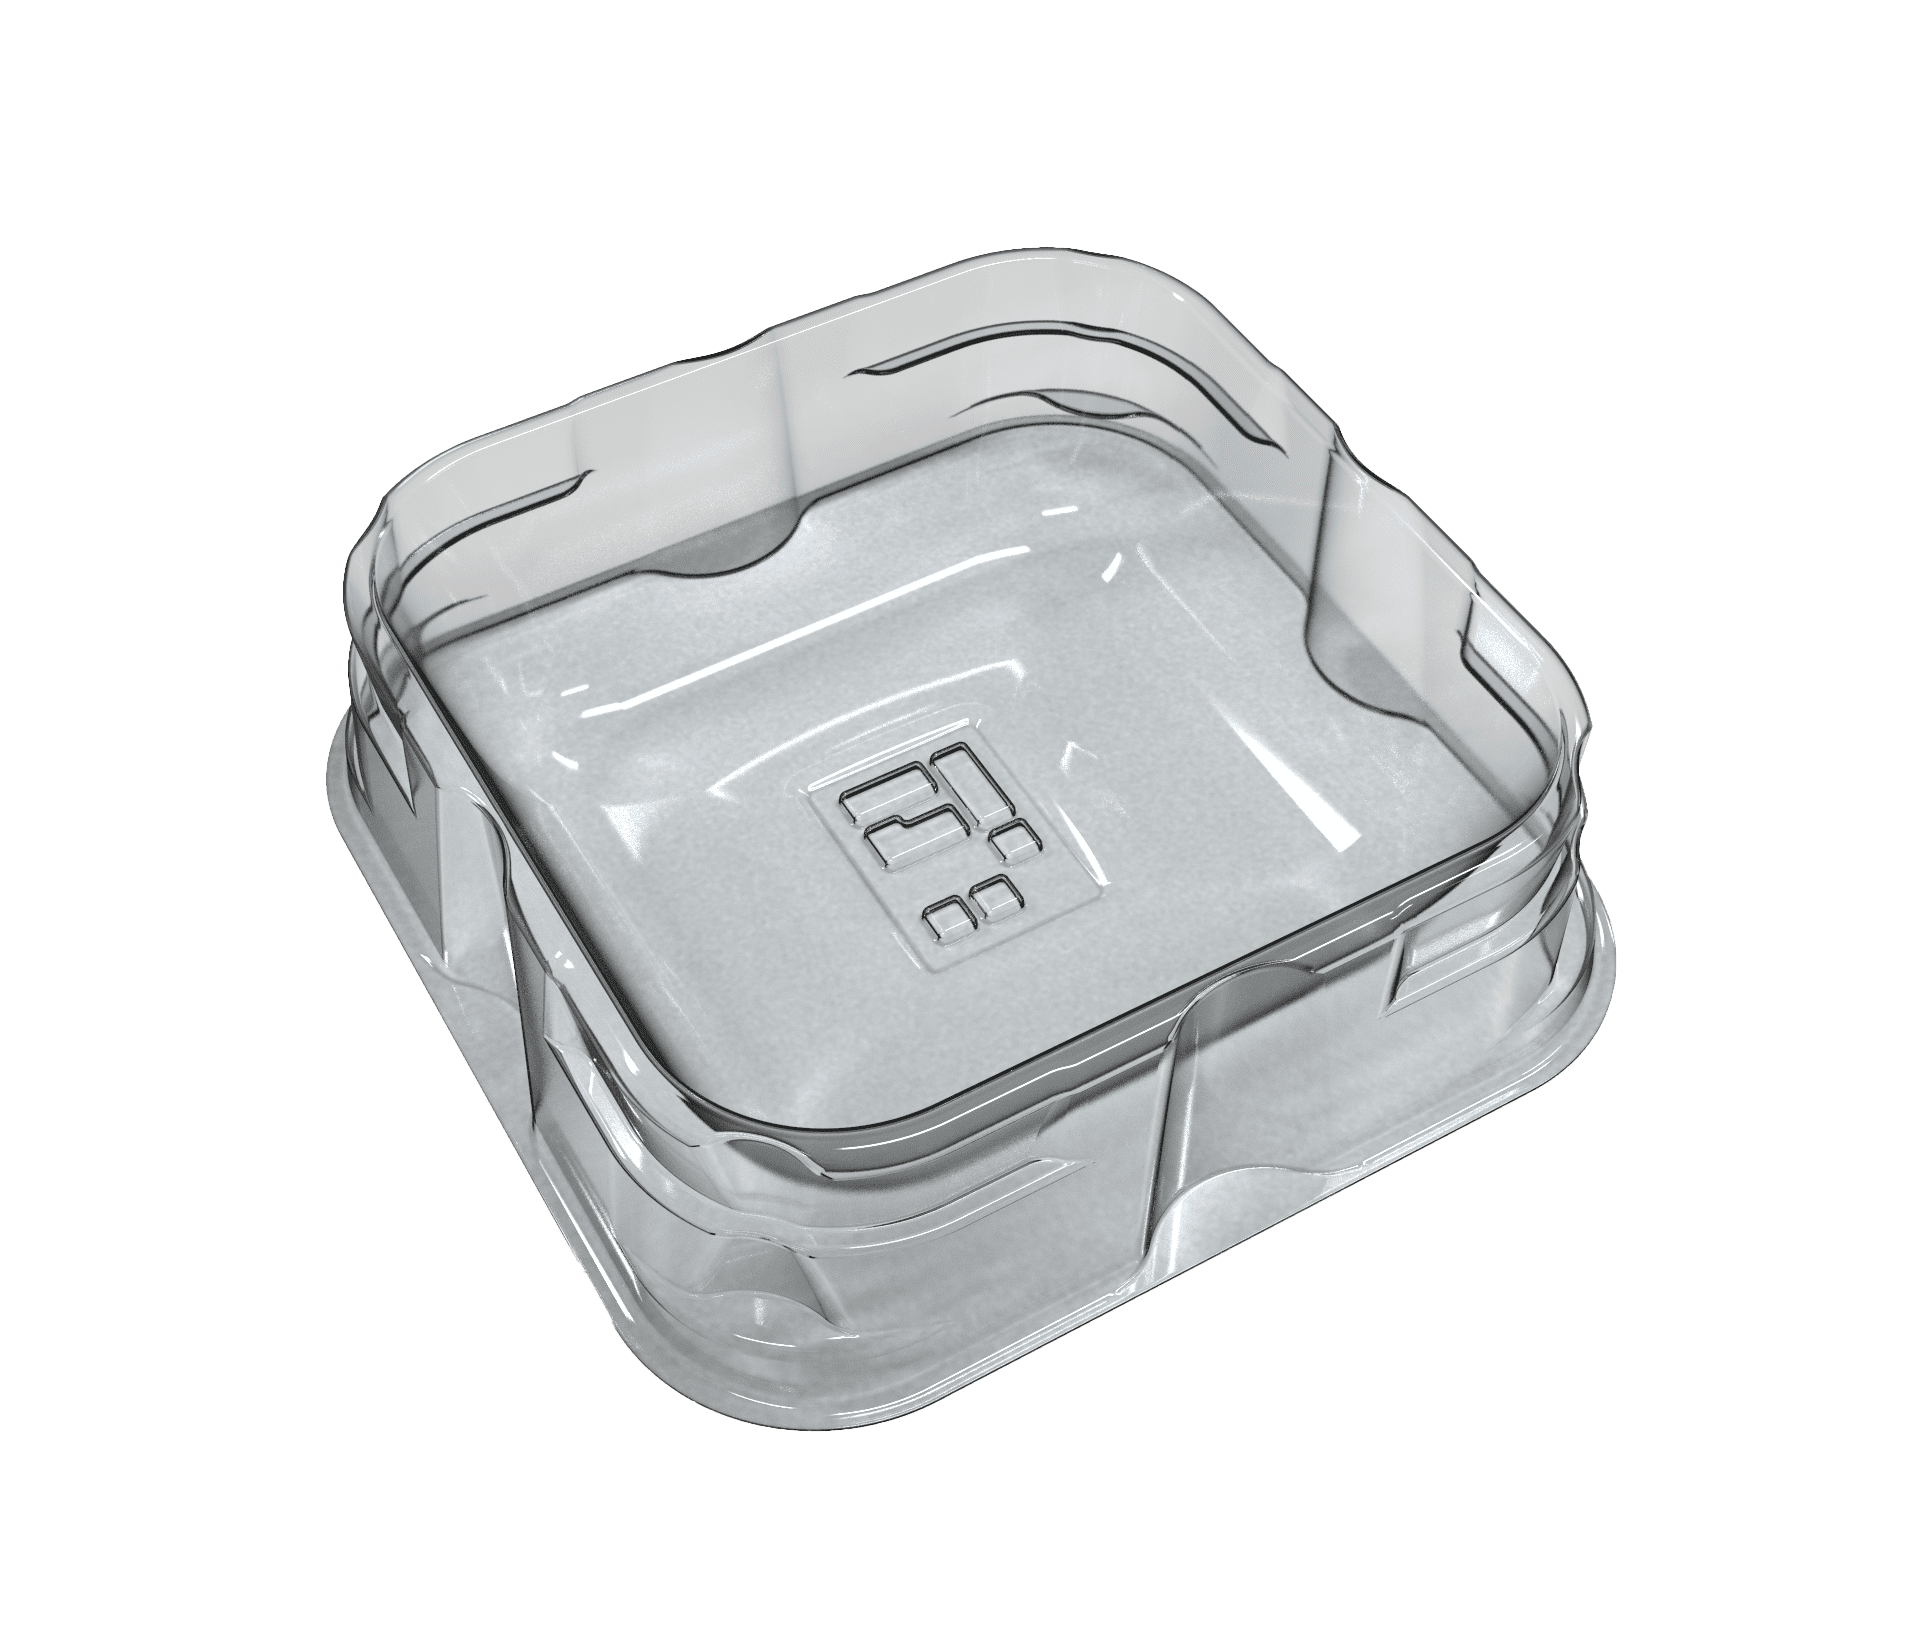 Clear Single-Style X-Trayz (includes the lid)